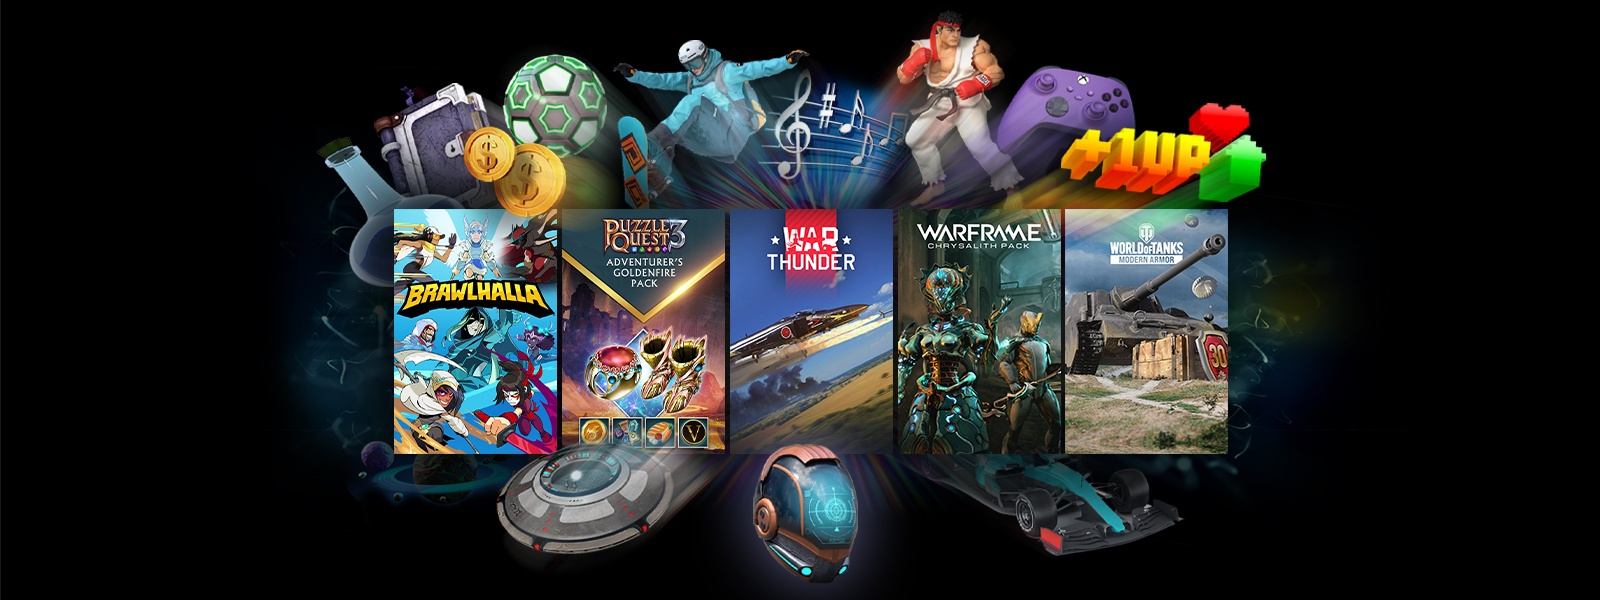 Boxart of games included in the Free to Play Frenzy Sale, including BRAWLHALLA - ALL LEGENDS PACK, Puzzle Quest 3 - Adventurer's Goldenfire Pack, and Warframe: Angels of the Zariman Chrysalith Pack.